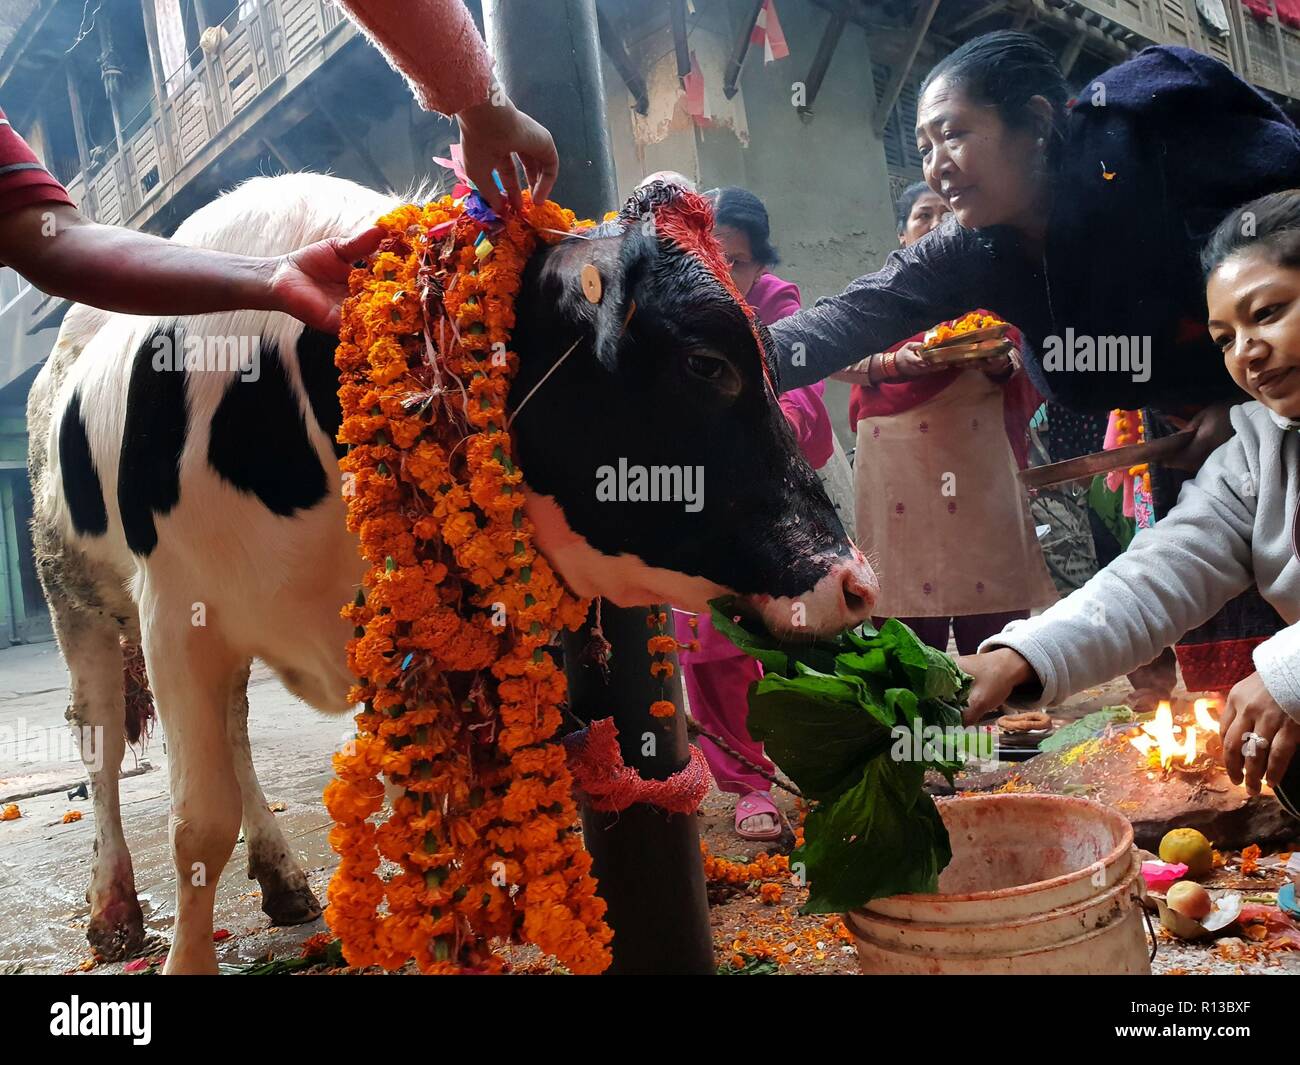 Kathmandu, Nepal. 07th Nov, 2018. People worship cow on a religious ceremony during Tihar festival. Tihar festival is the festival of lights and flowers even known as Deepawali, is dedicated to various religious animals like crow, cow and dog, showing a bonding with relations with humans. Credit: Archana Shrestha/Pacific Press/Alamy Live News Stock Photo